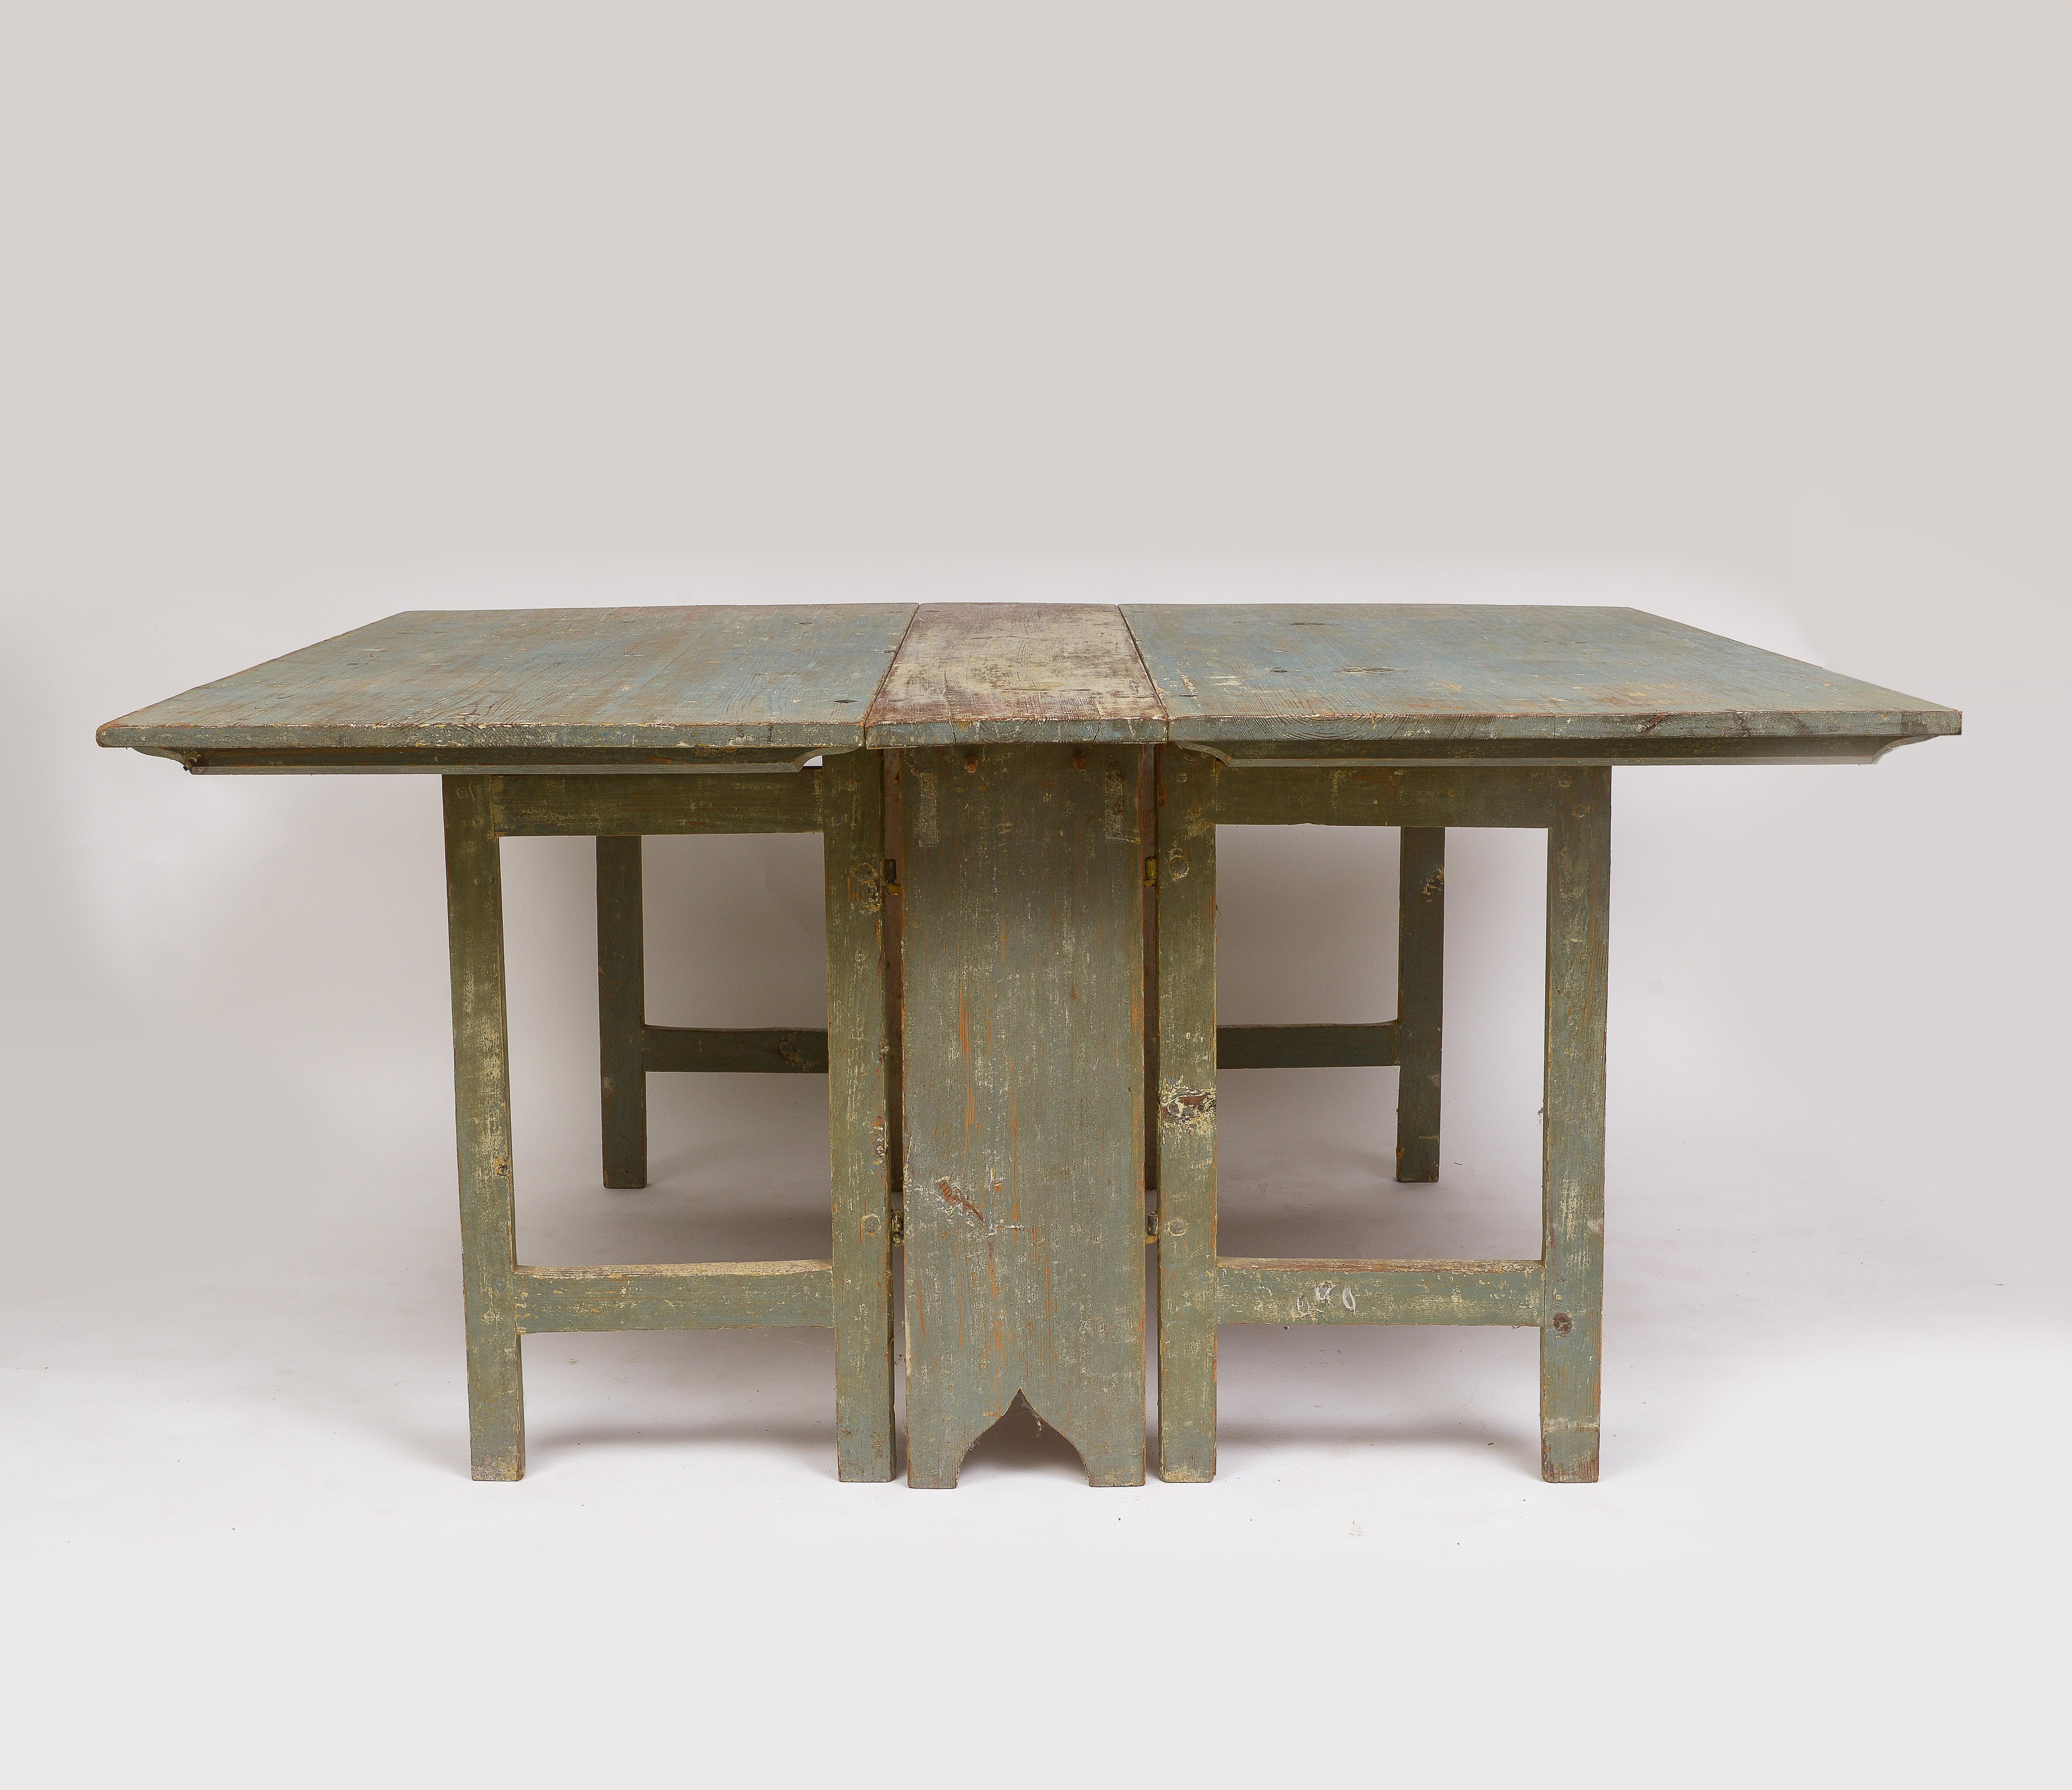 Faded gray painted drop leaf table
Beautiful patina the height of Swedish style
Gate legs fold to a narrow side table